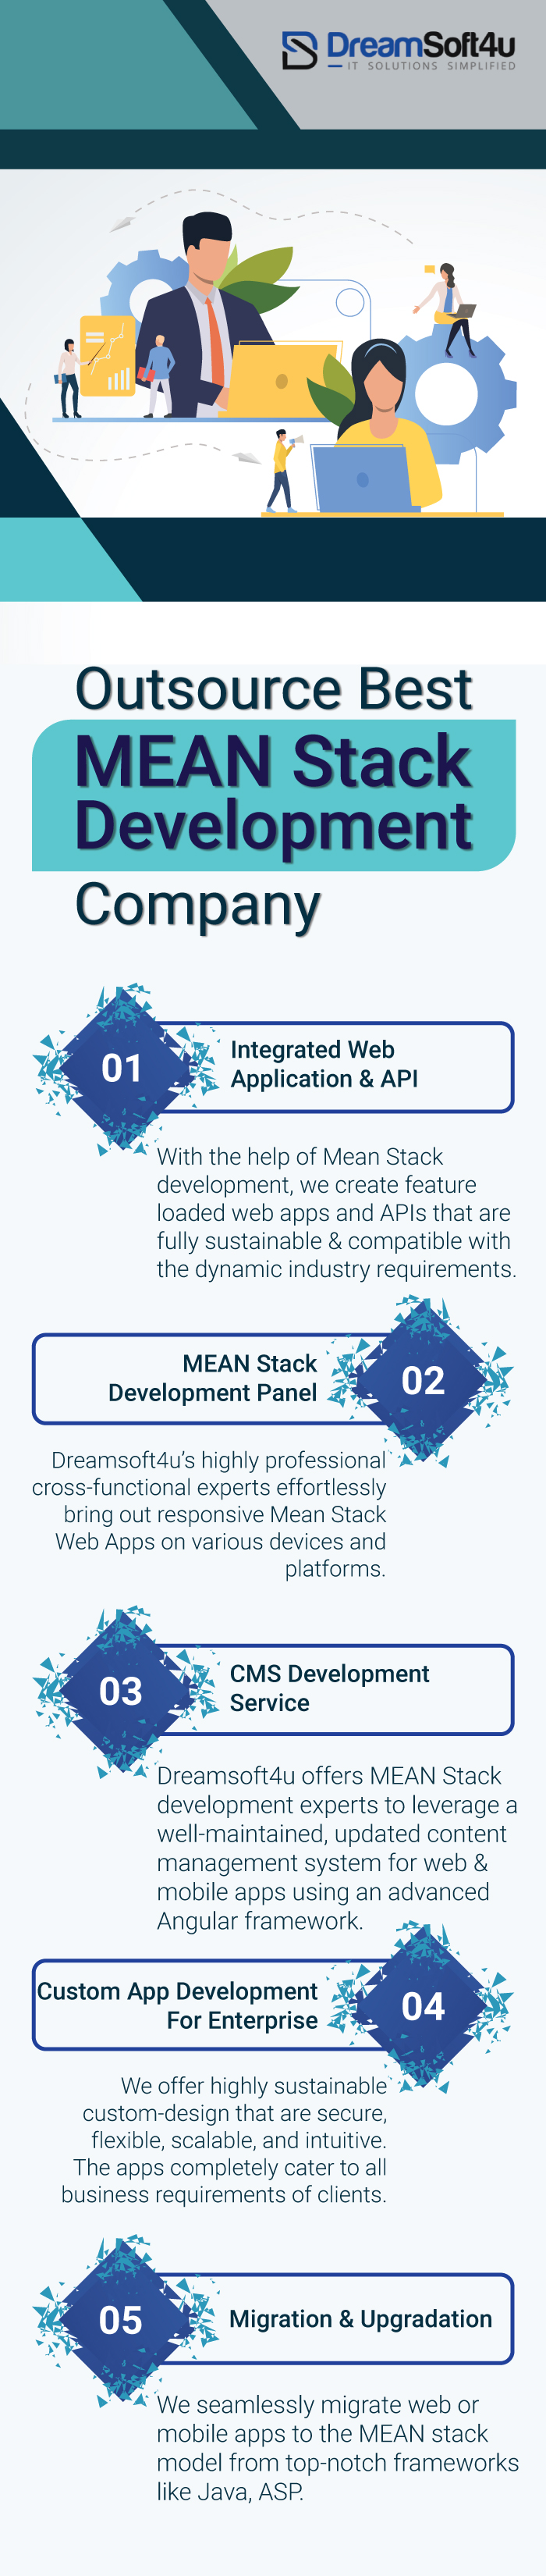 Best MEAN Stack Development Company